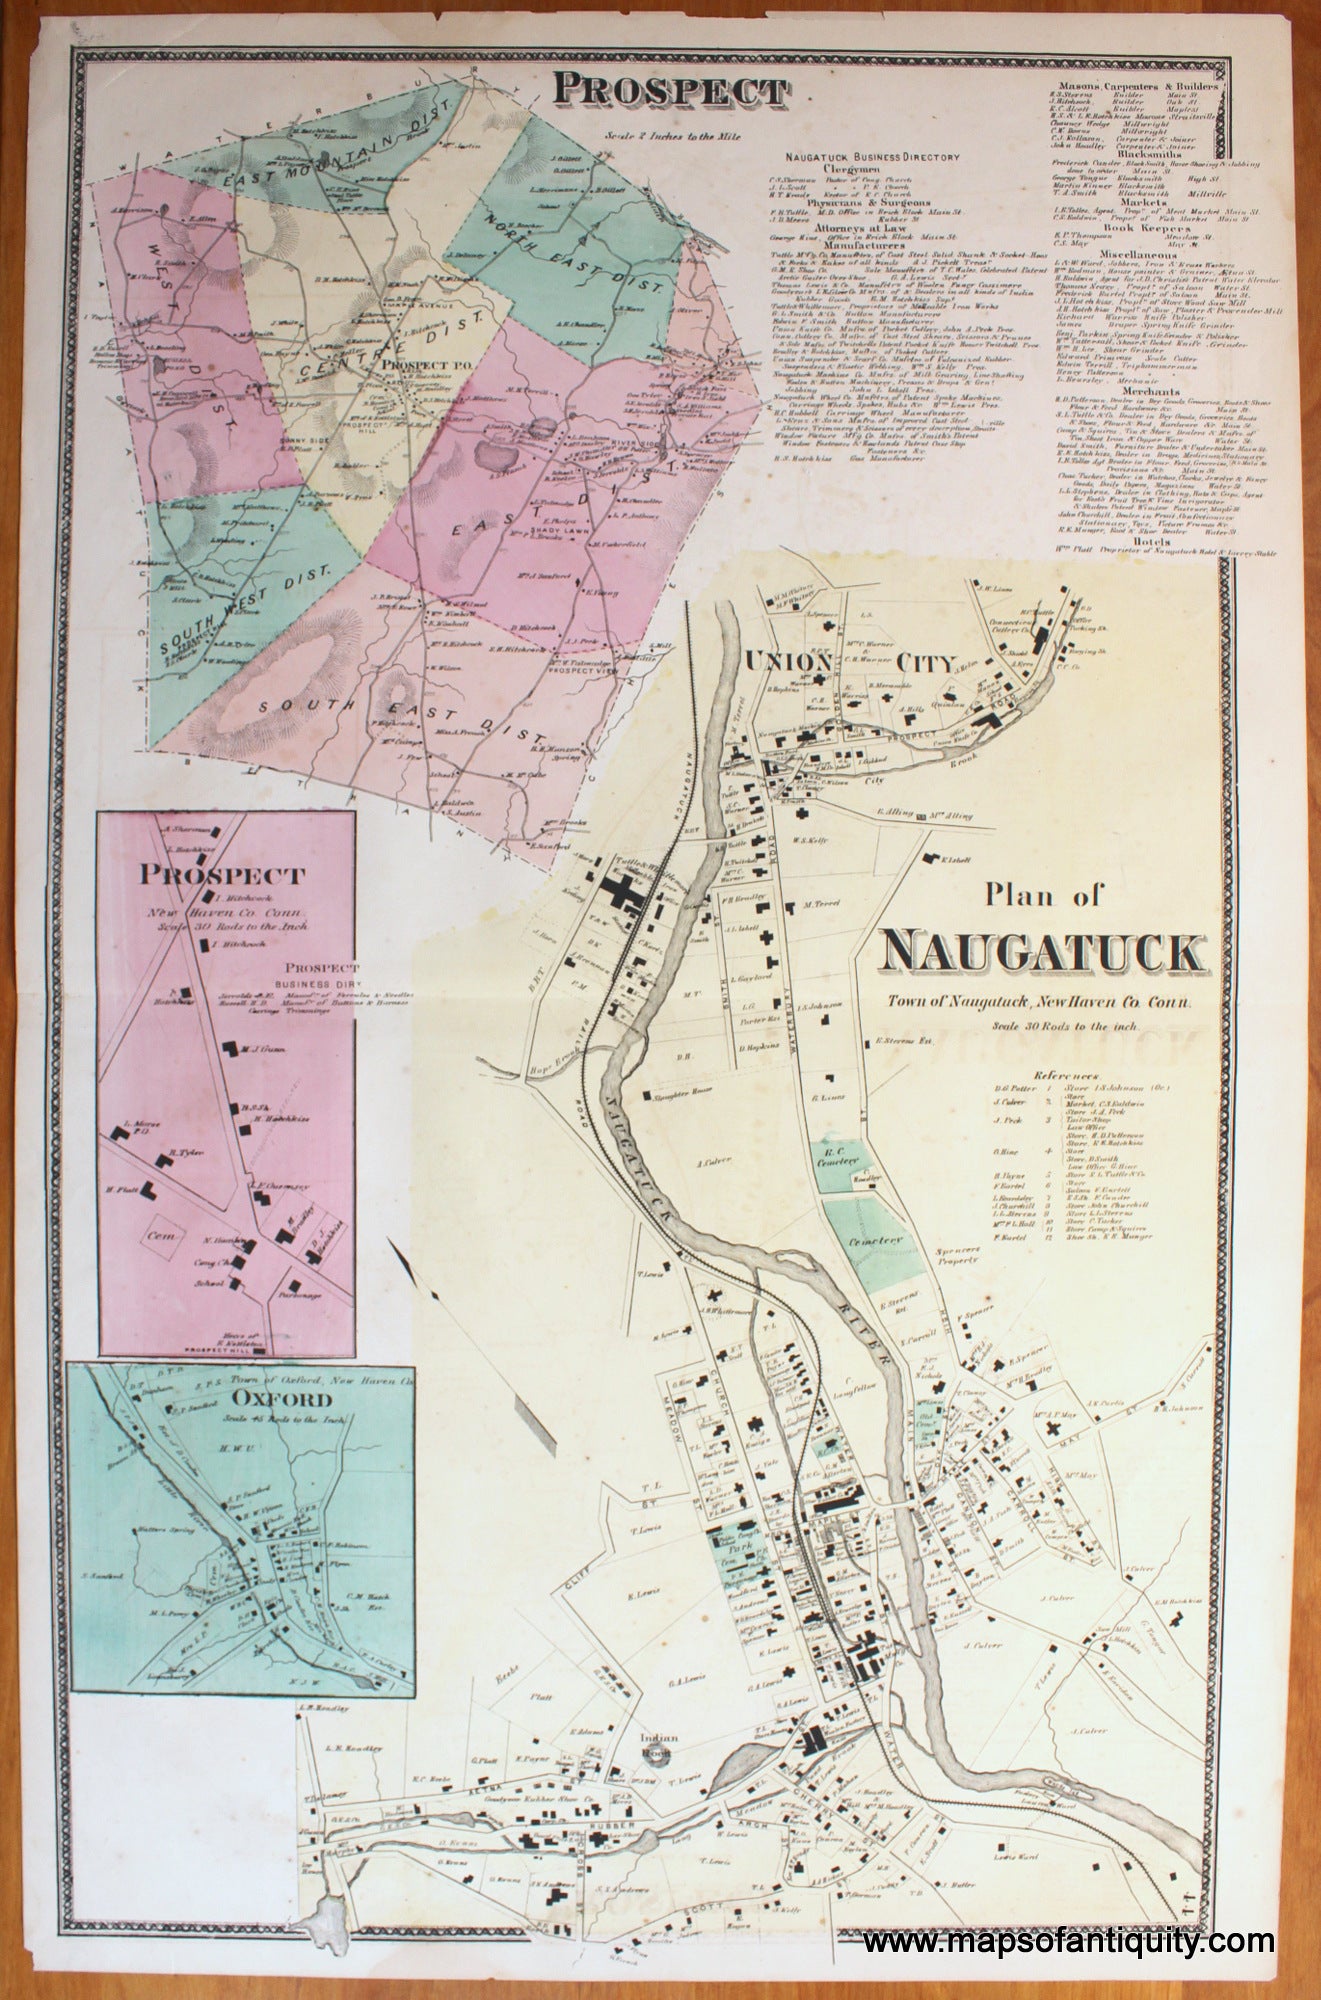 Antique-Hand-Colored-Map-Plan-of-Naugatuck-Town-of-Naugatuck-New-Haven-Co.-Conn.--United-States-Connecticut-1868-Beers-Maps-Of-Antiquity